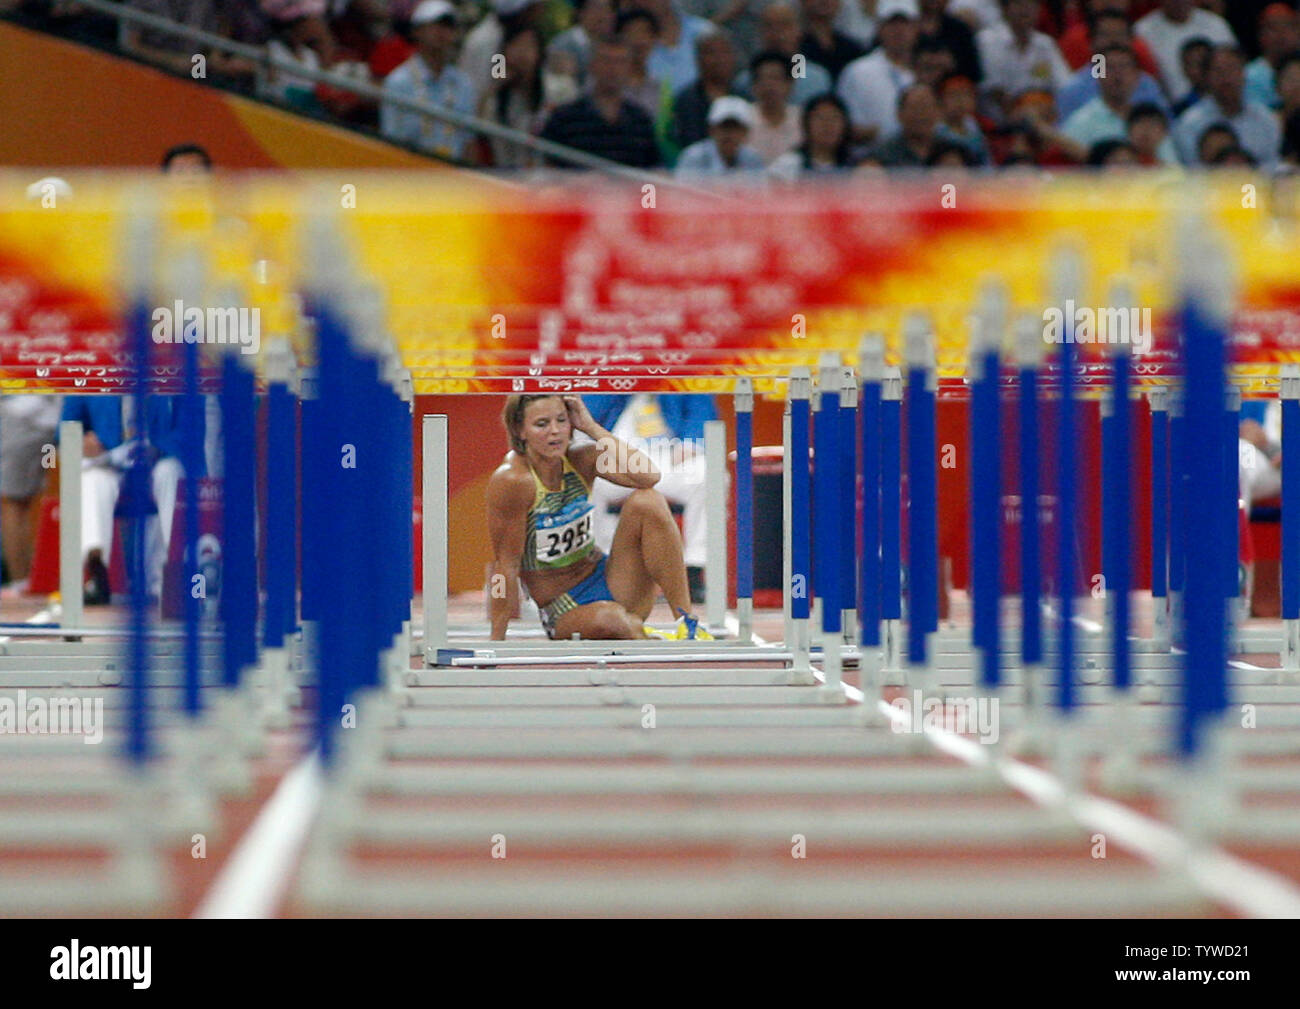 Susanna Kallur of Sweden sits on the track after falling at the beginning of the semifinals of the women's 100m hurdles at the Summer Olympics in Beijing on August 18, 2008. Kallur did not finish.   (UPI Photo/Terry Schmitt) Stock Photo